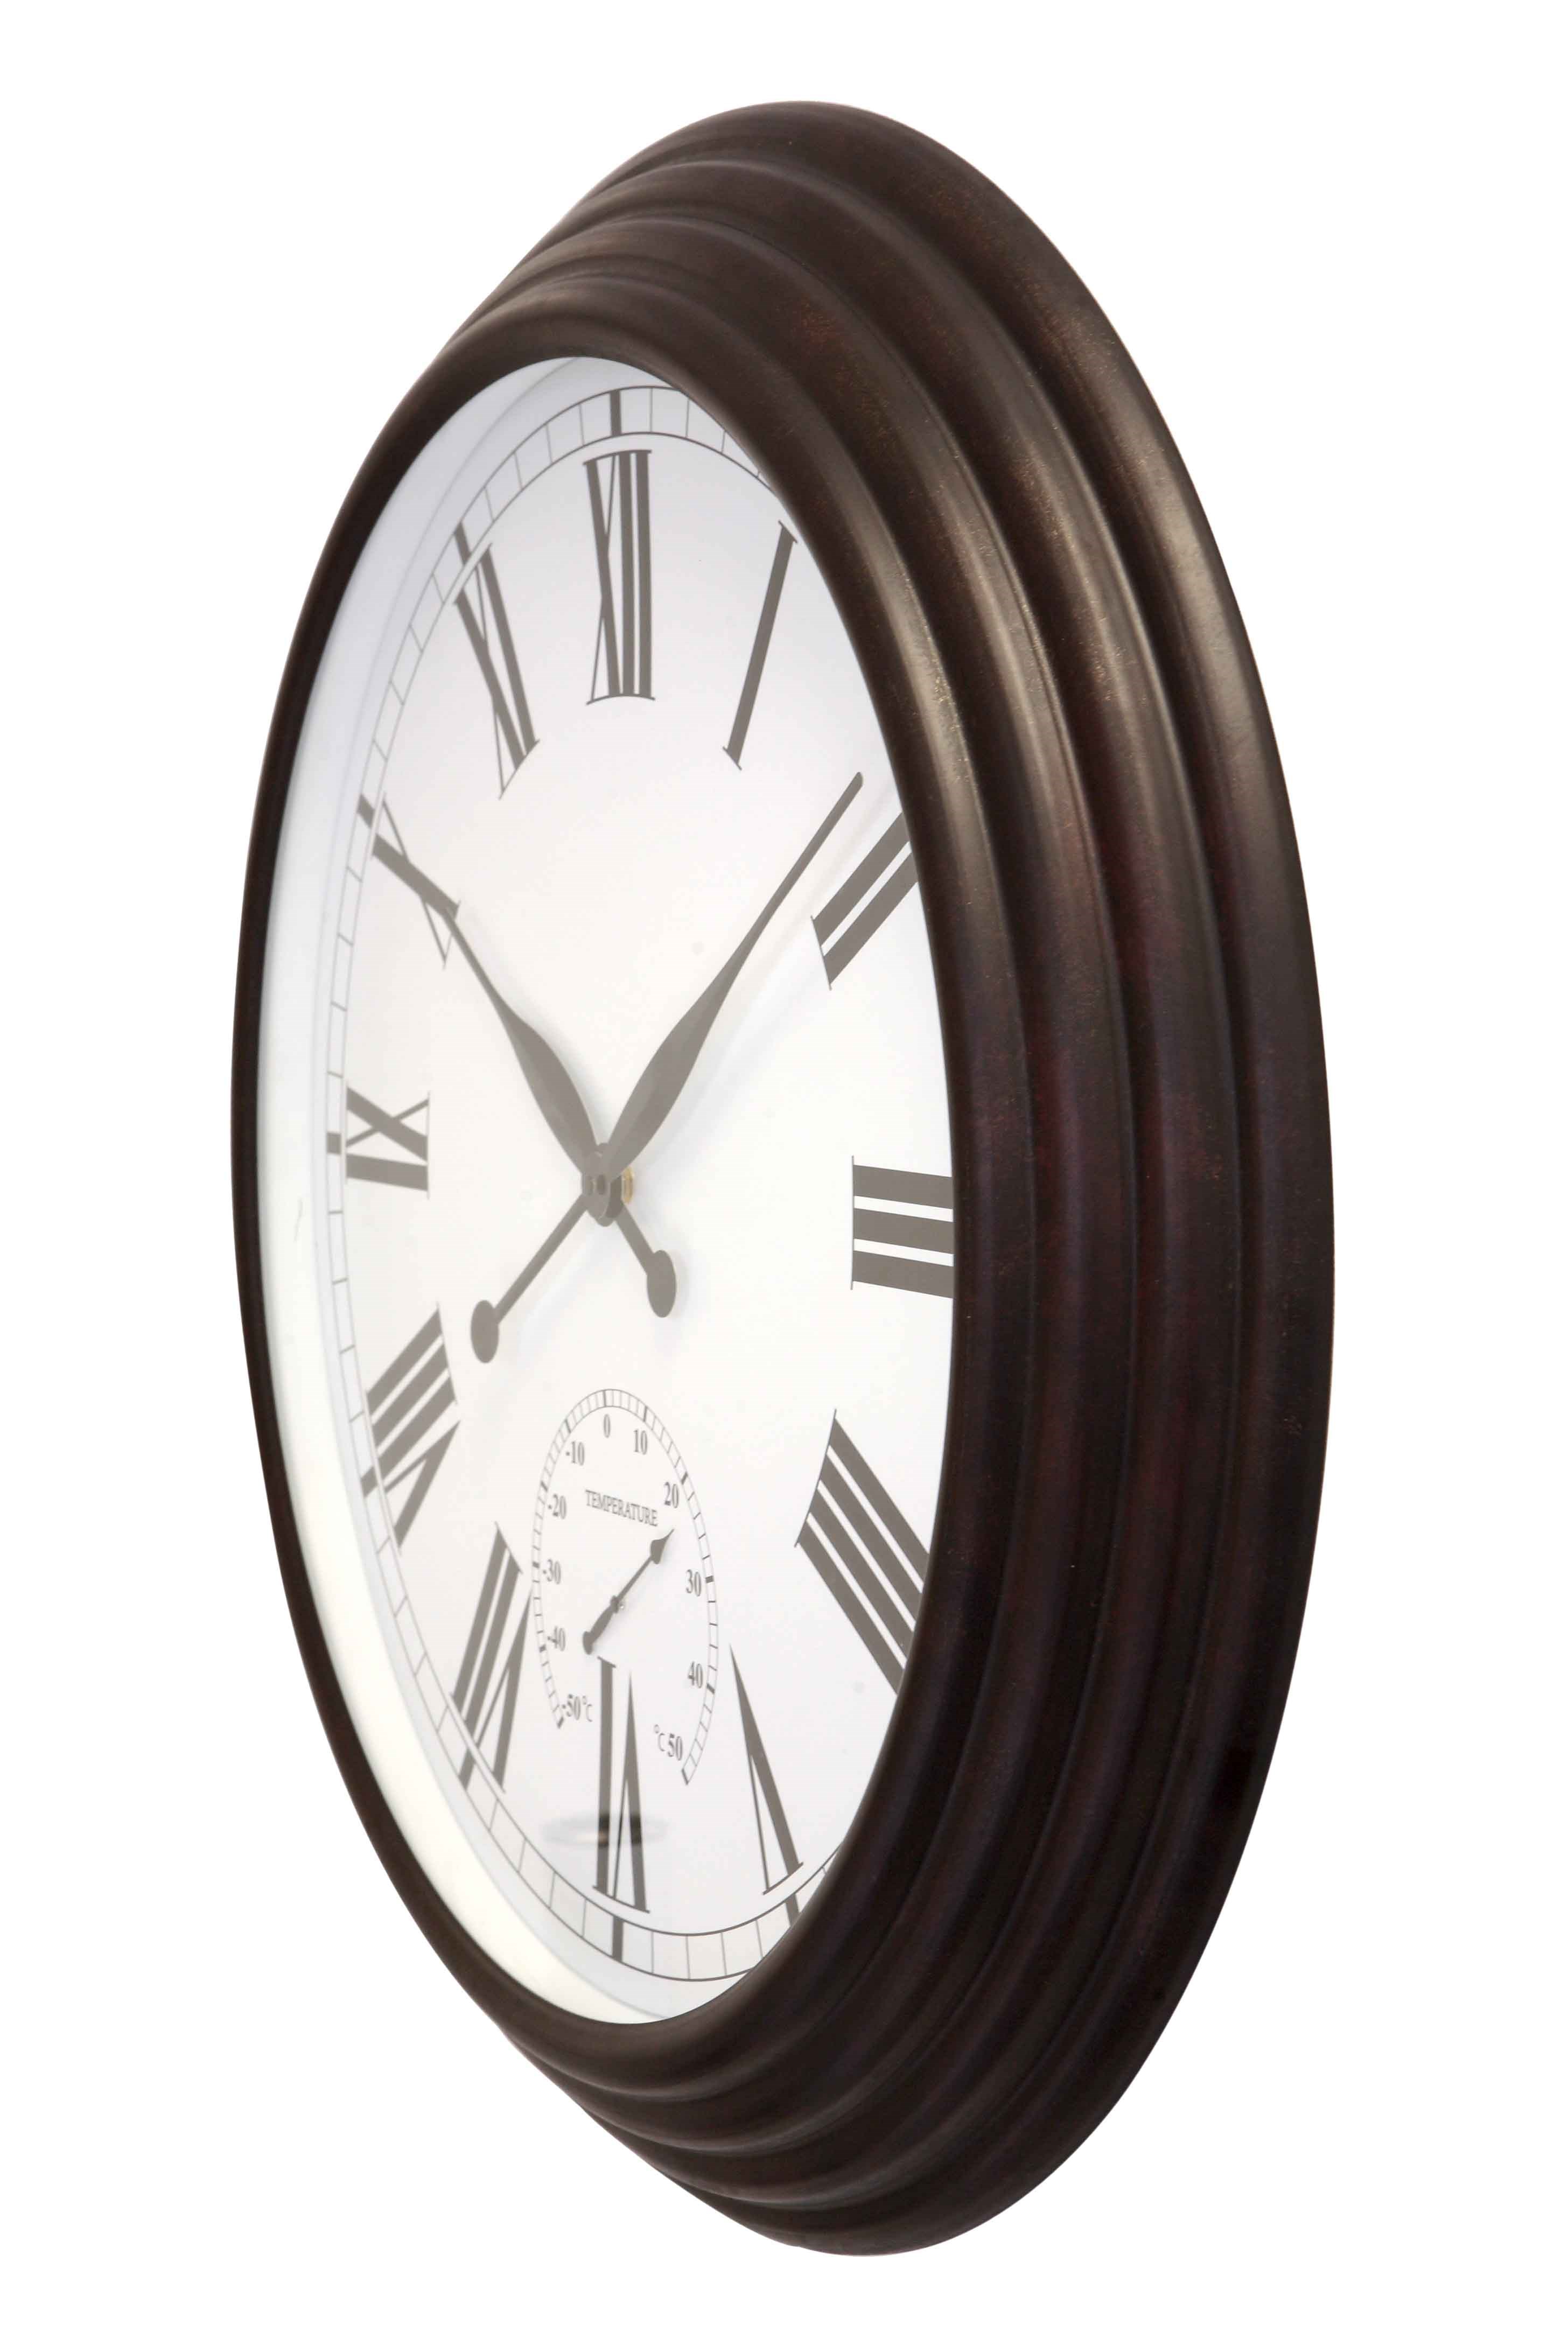 Giant Garden Clock w/ Thermometer - Antique Brown | About Time™